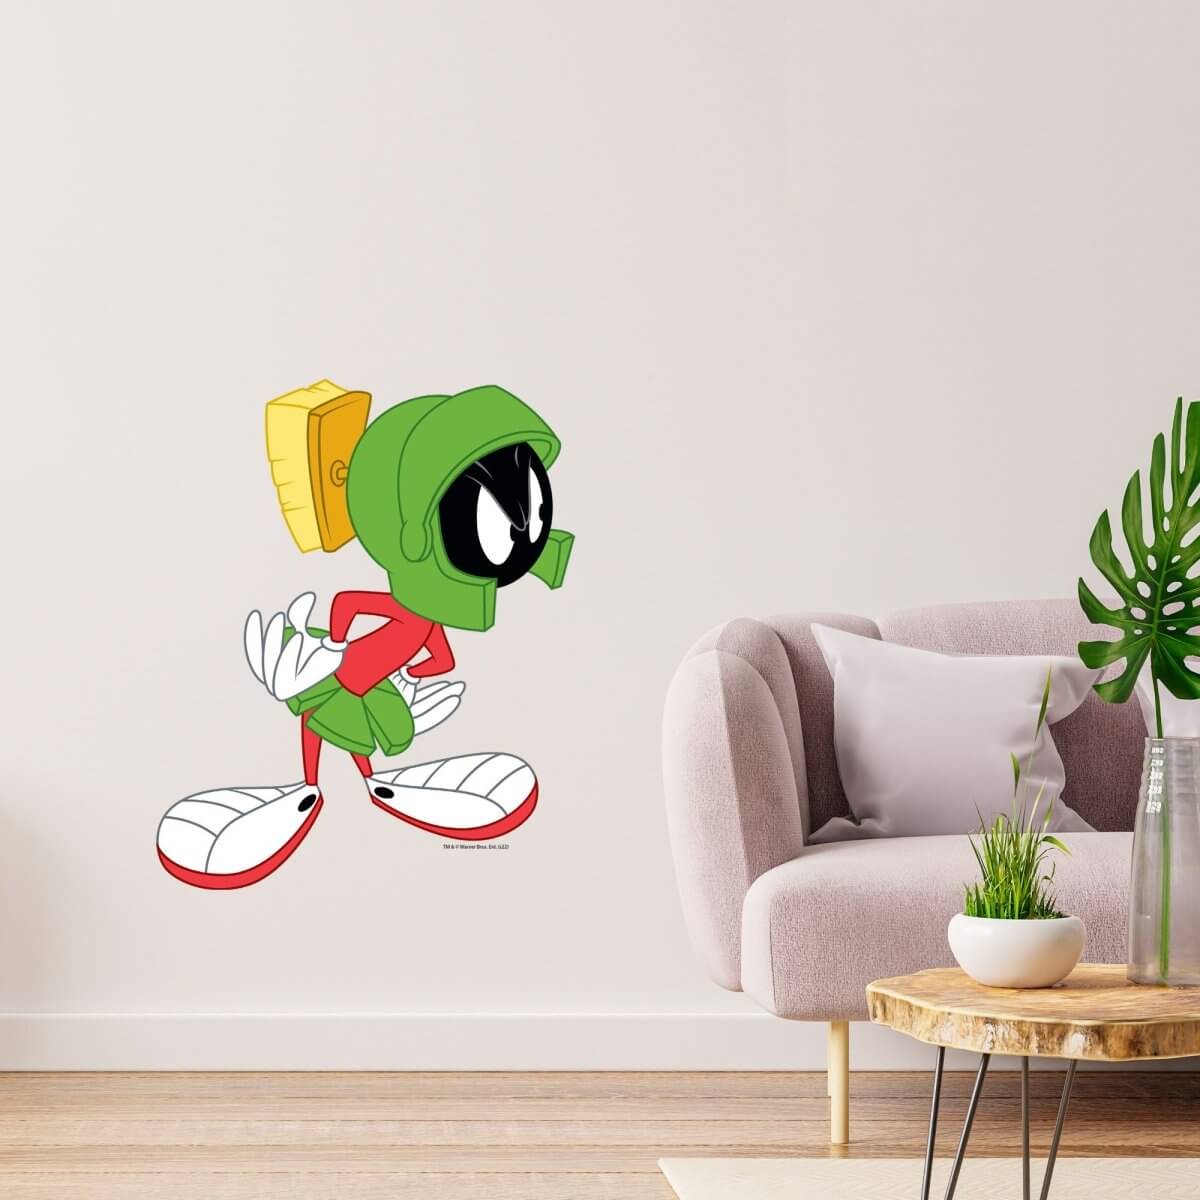 Kismet Decals Looney Tunes Marvin the Martian Licensed Wall Sticker - Easy DIY Home & Kids Room Decor Wall Decal Art - Kismet Decals